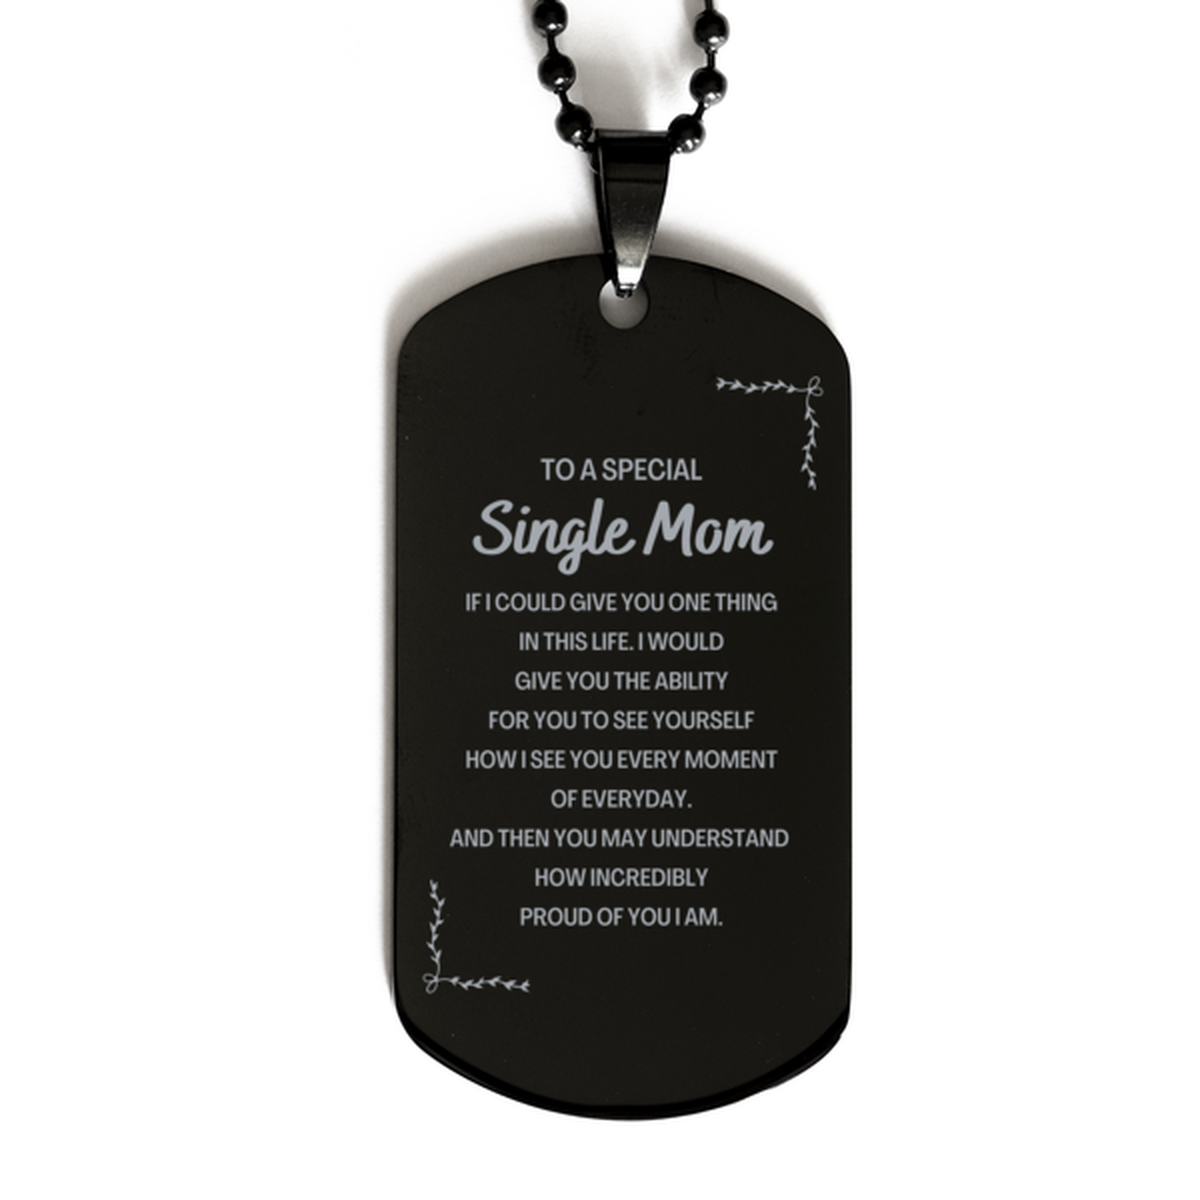 To My Single Mom Black Dog Tag, Gifts For Single Mom Engraved, Inspirational Gifts for Christmas Birthday, Epic Gifts for Single Mom To A Special Single Mom how incredibly proud of you I am